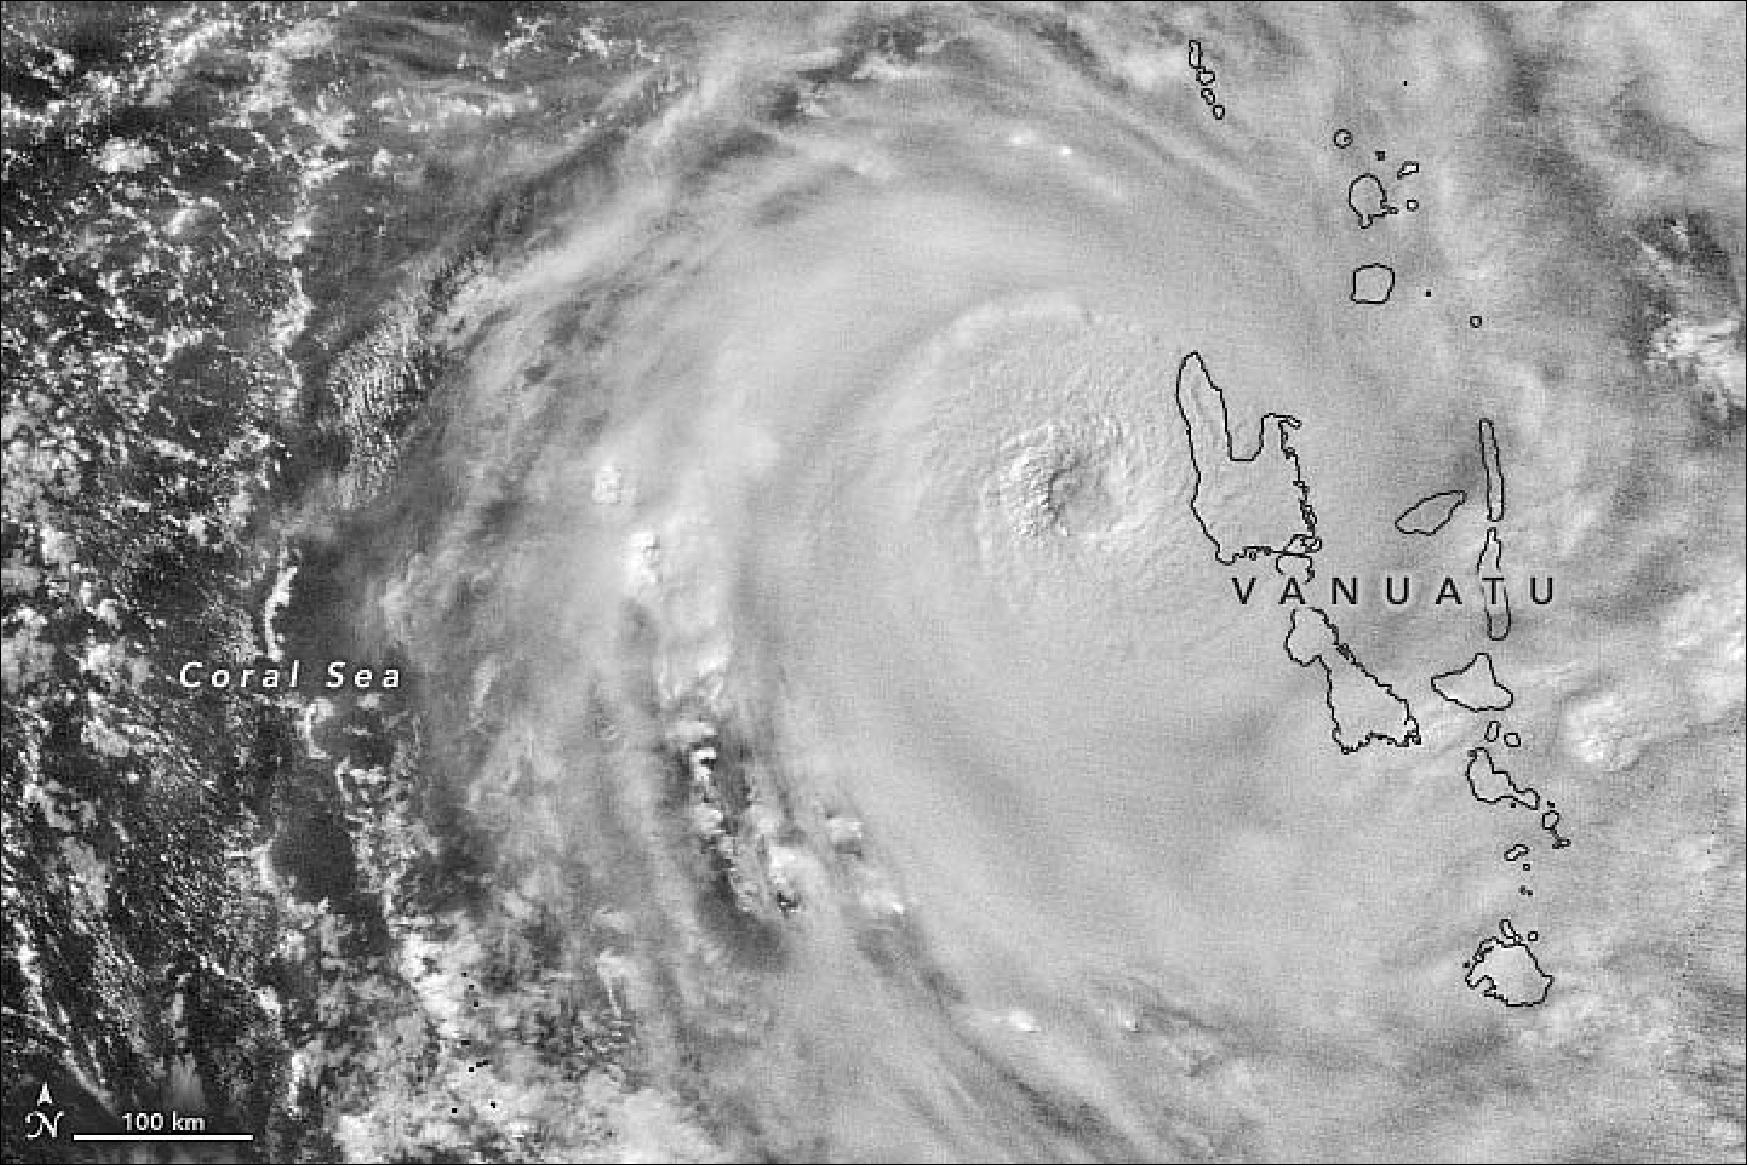 Figure 21: This nighttime image shows Harold approaching Espiritu Santo, Vanuatu’s largest island. It was acquired around 1:50 a.m. local time on April 6, 2020 (14:50 UTC on April 5, 2020) by the Visible Infrared Imaging Radiometer Suite (VIIRS) on the NASA-NOAA Suomi NPP satellite (image credit: NASA Earth Observatory, image by Joshua Stevens, using VIIRS day-night band data from the Suomi NPP satellite. Story by Kasha Patel)